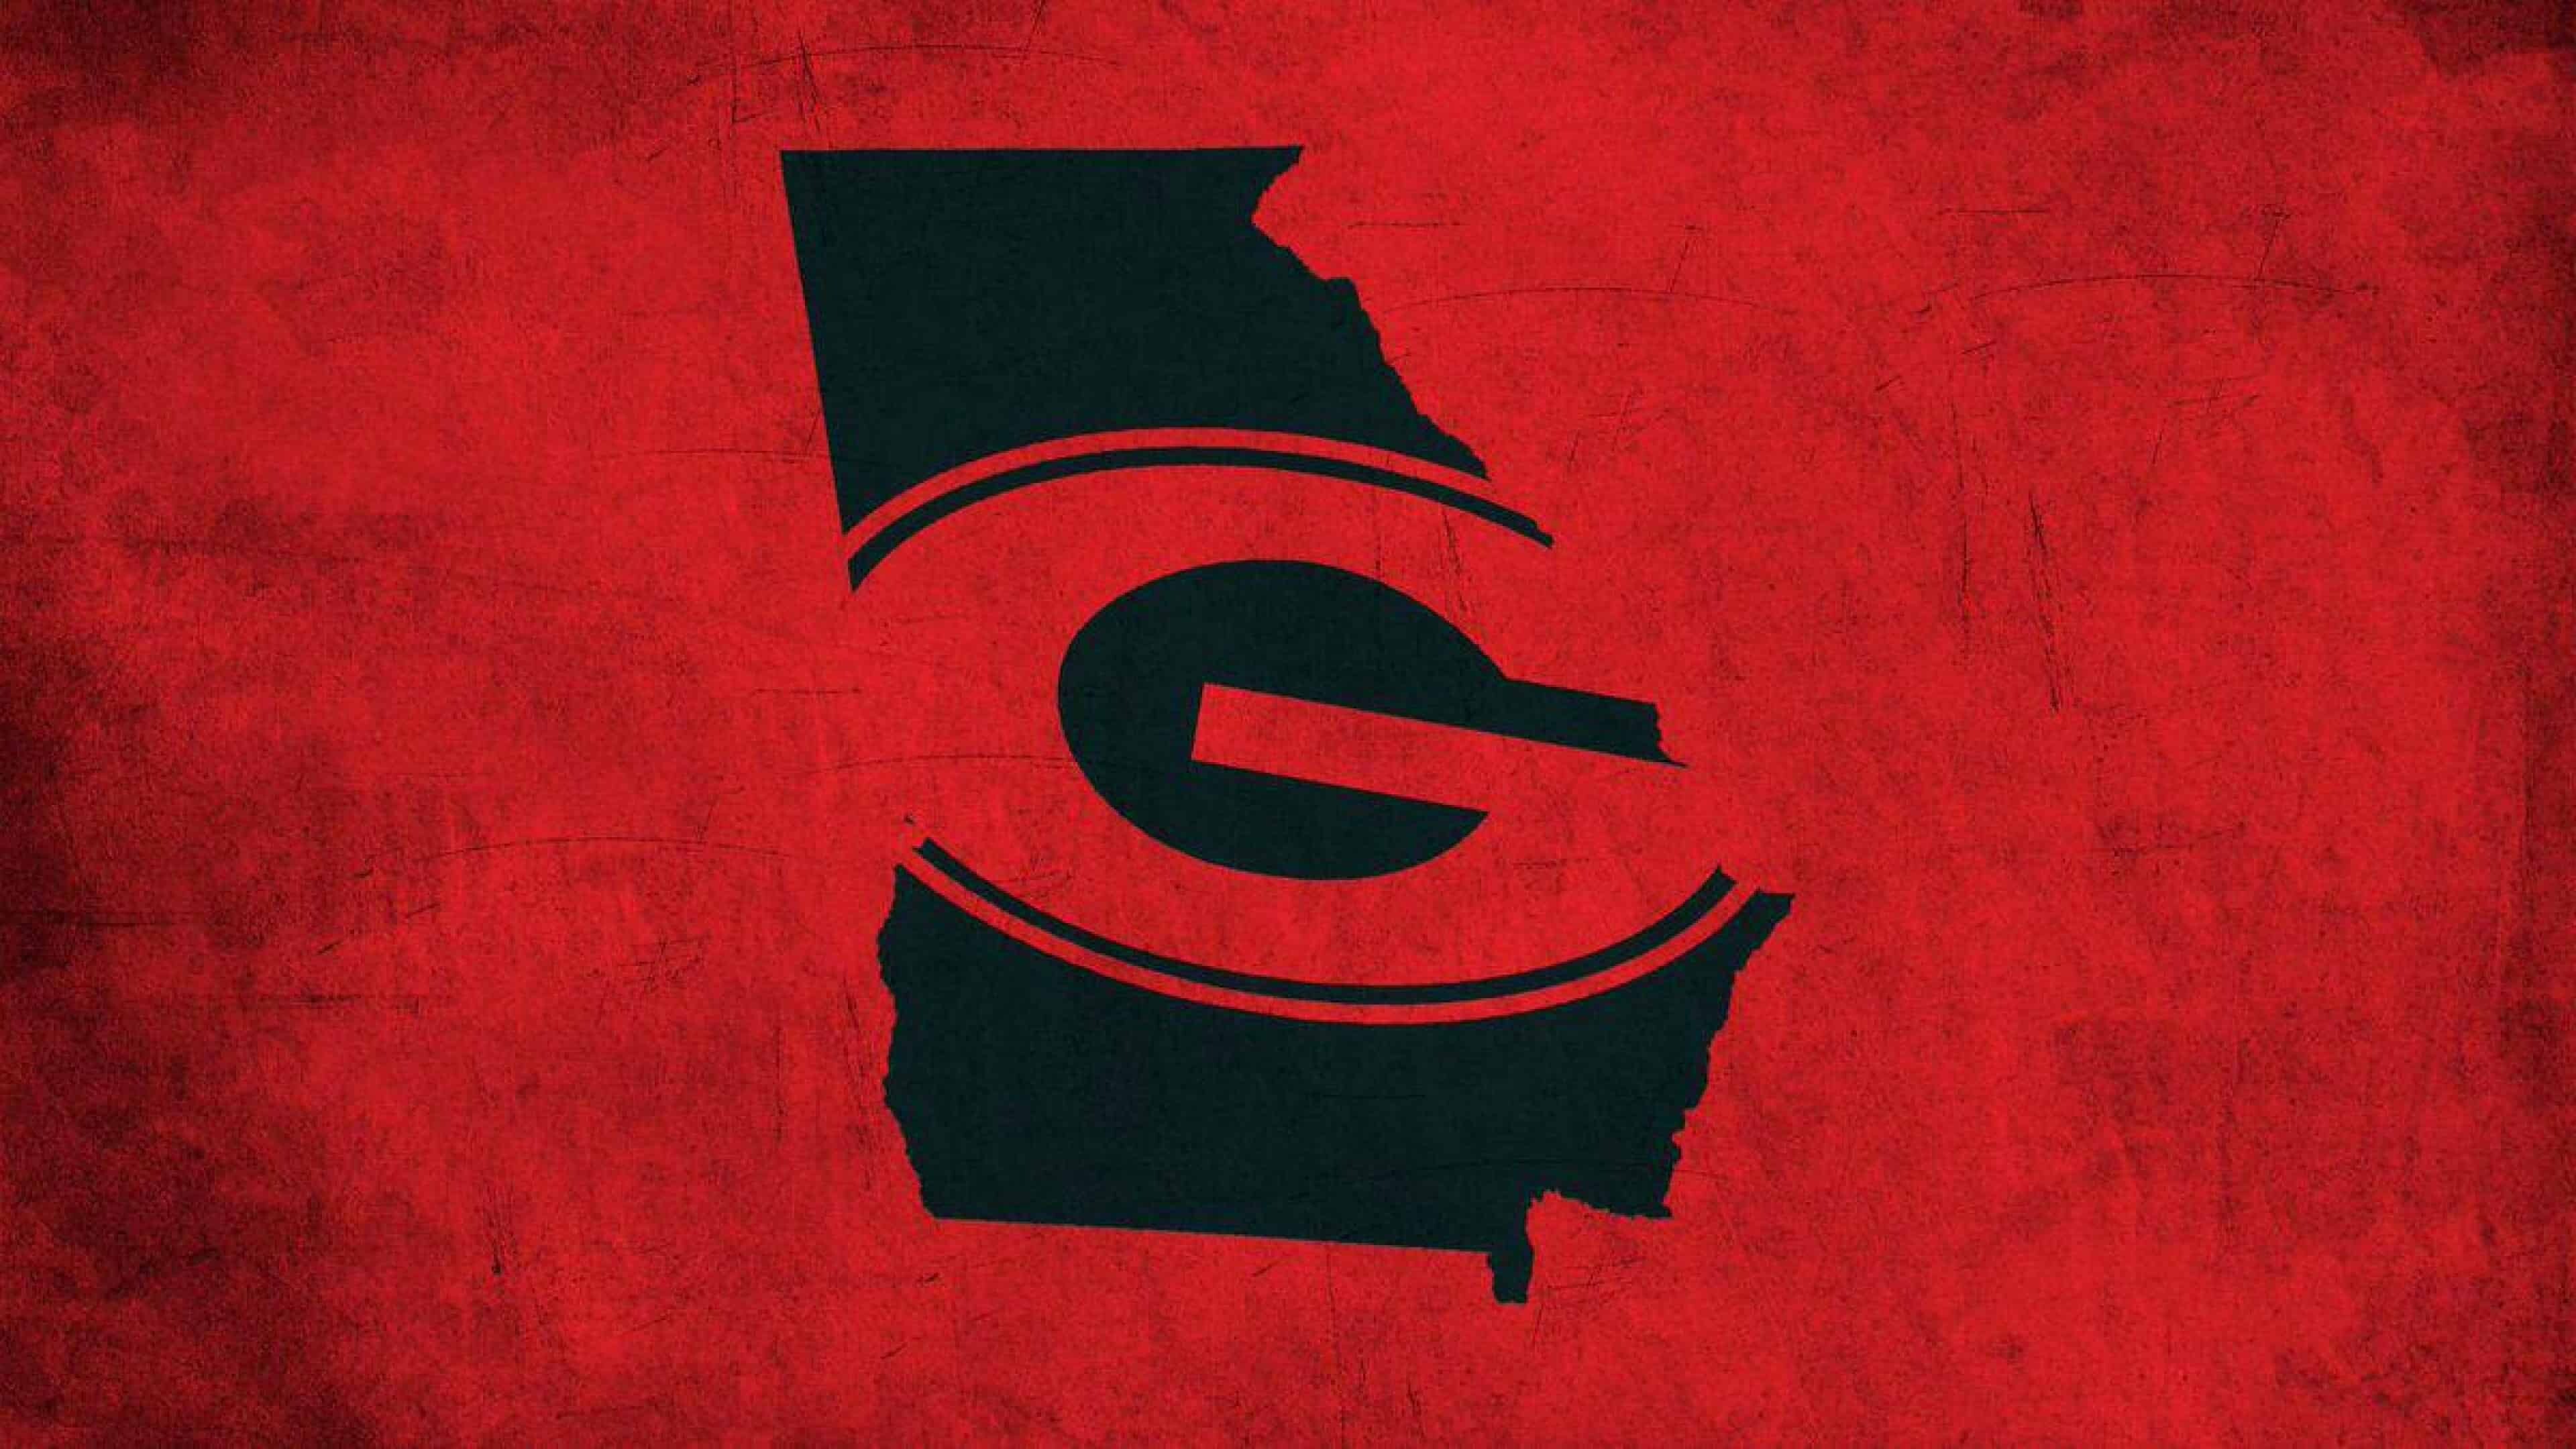 Georgia Bulldogs: Black, Red, Minimalistic, The team that compete in the Football Bowl Subdivision. 3840x2160 4K Wallpaper.